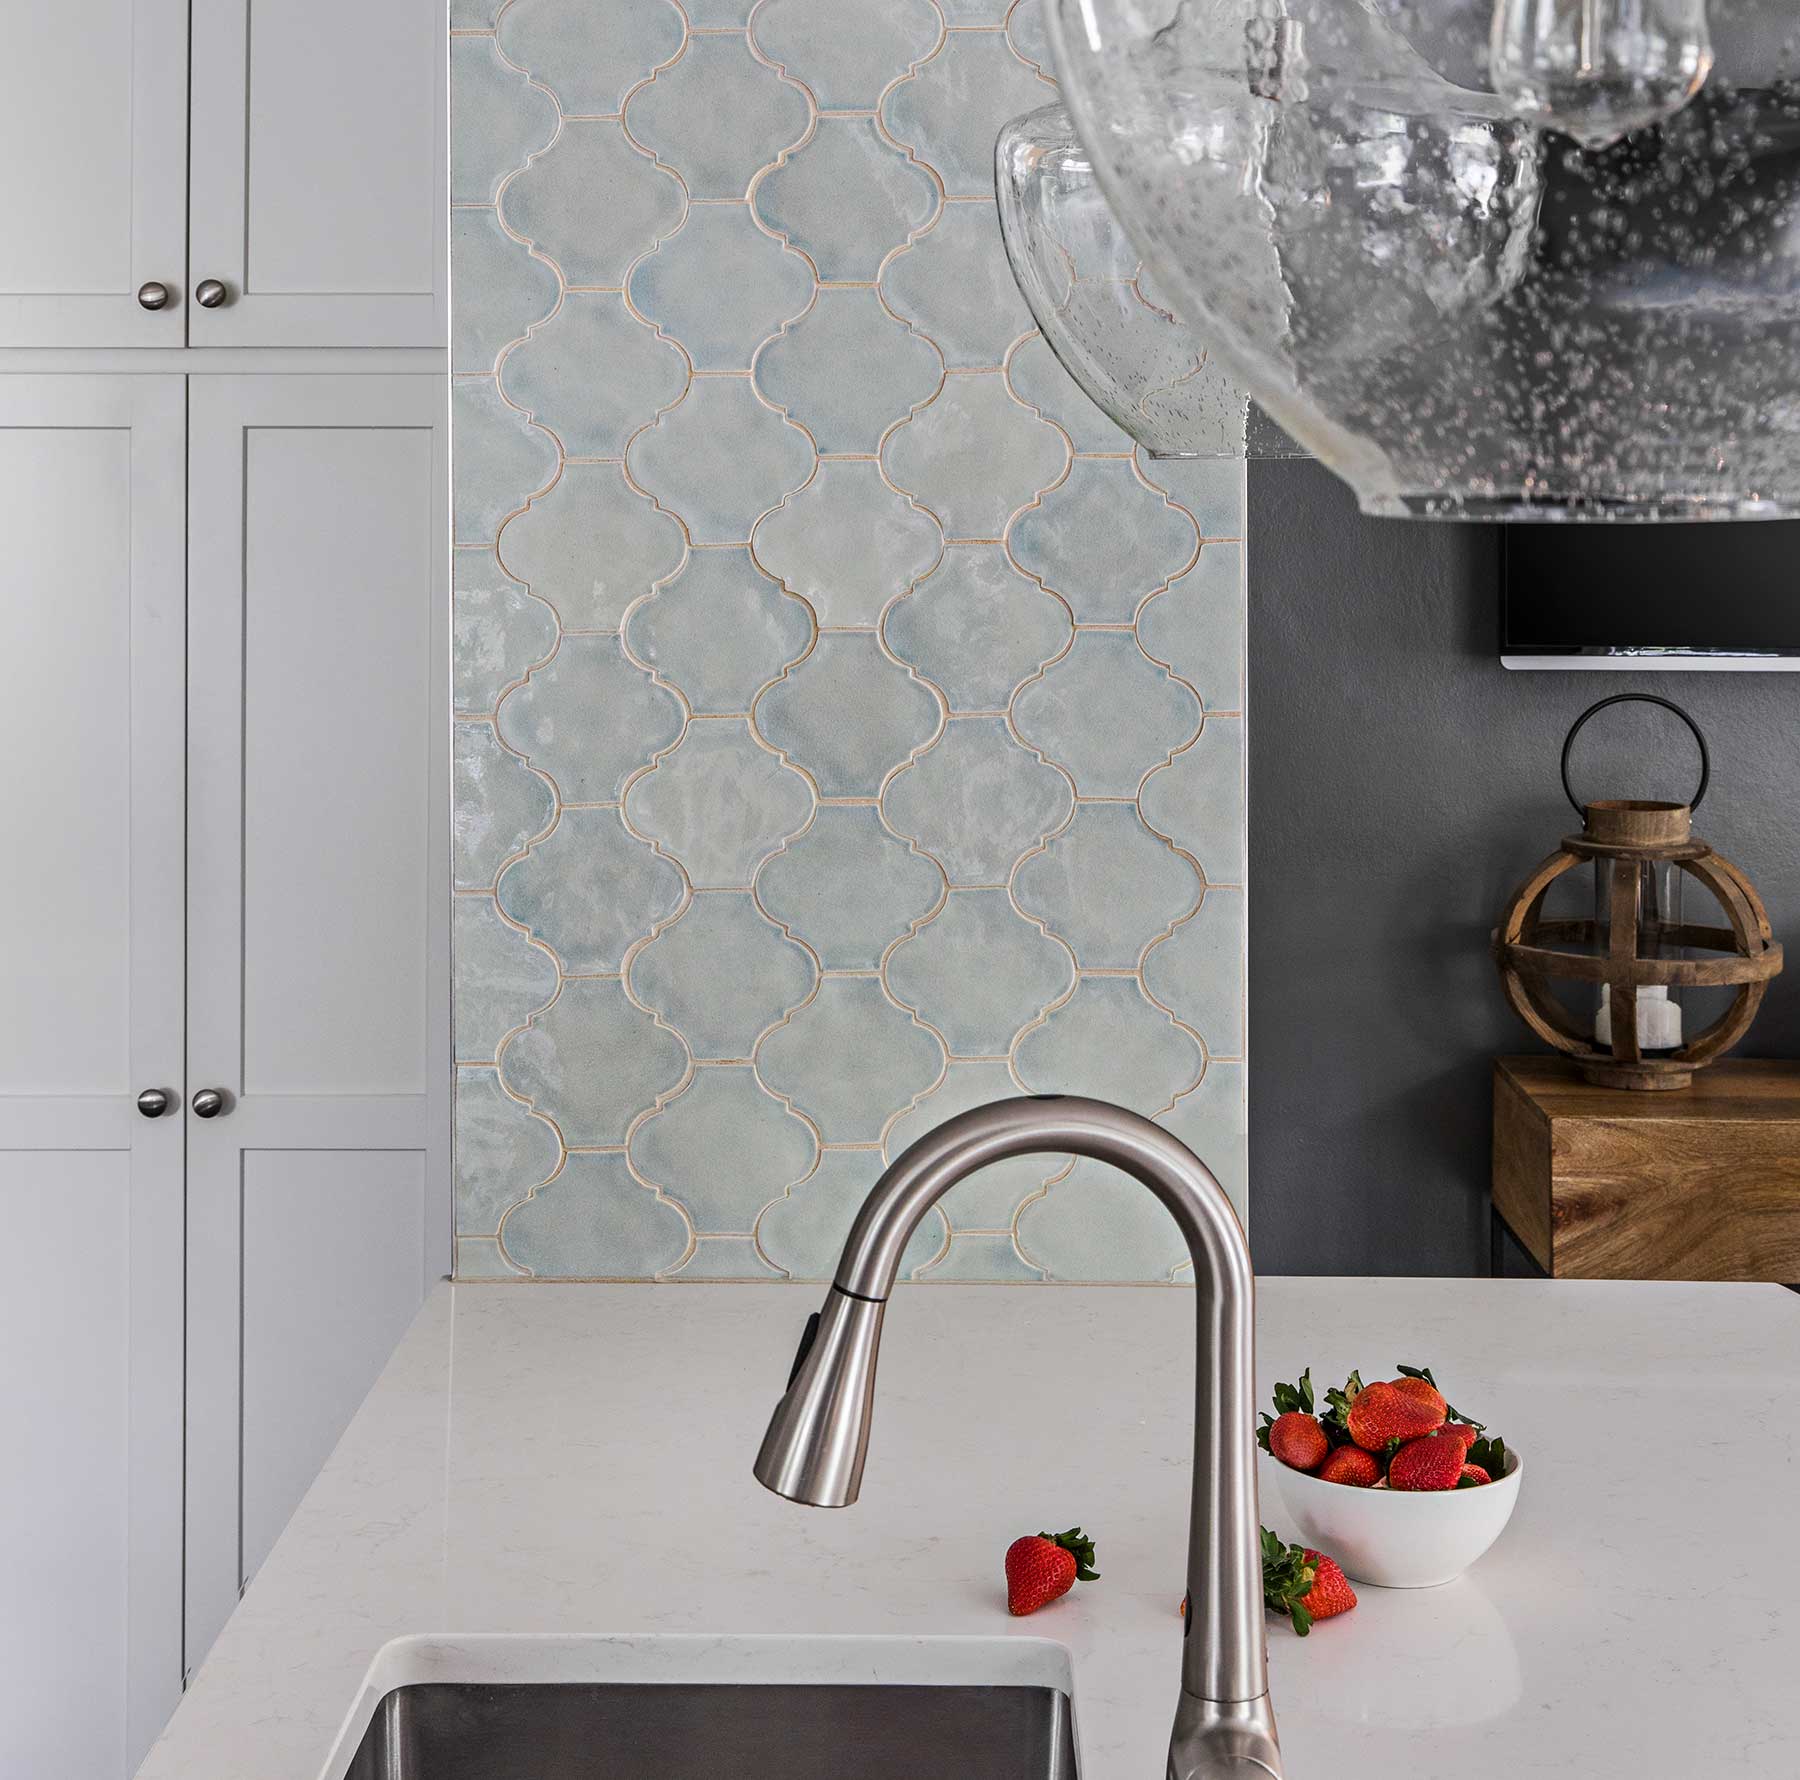 Tiled wall partition in remodeled kitchen